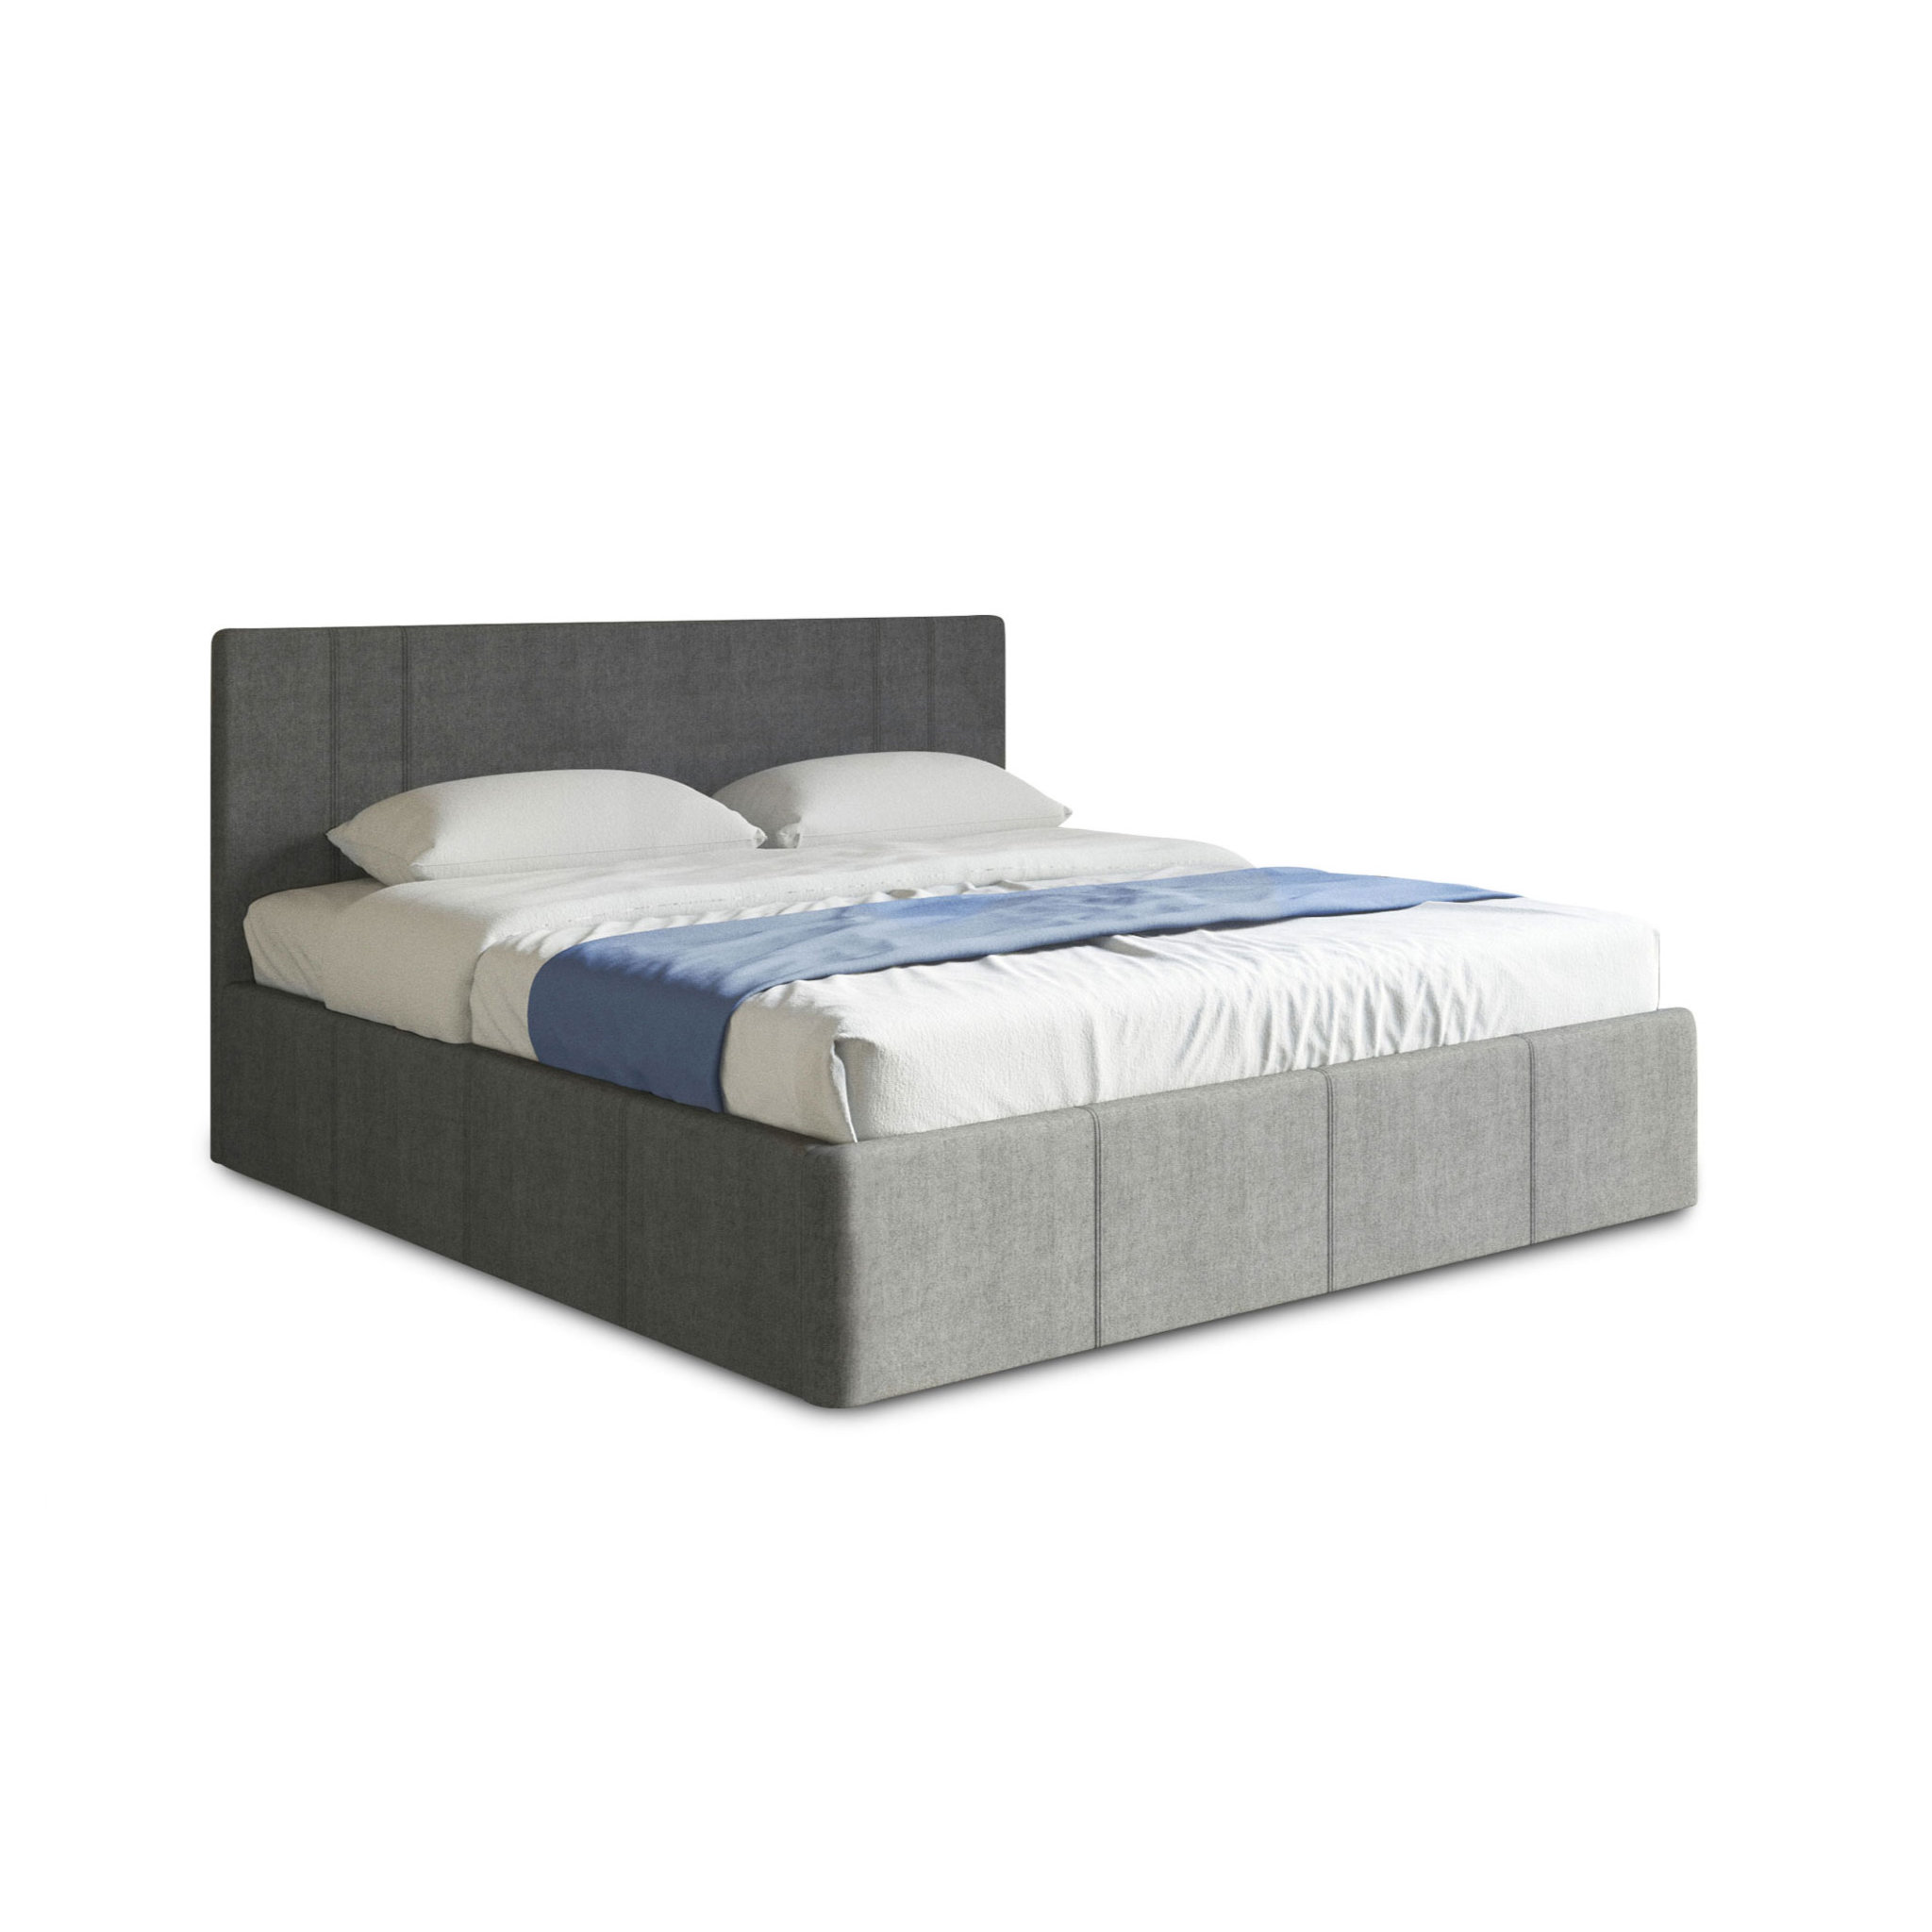 Reveal Queen Side Lifting Storage Bed, Gray Bed Frame Full